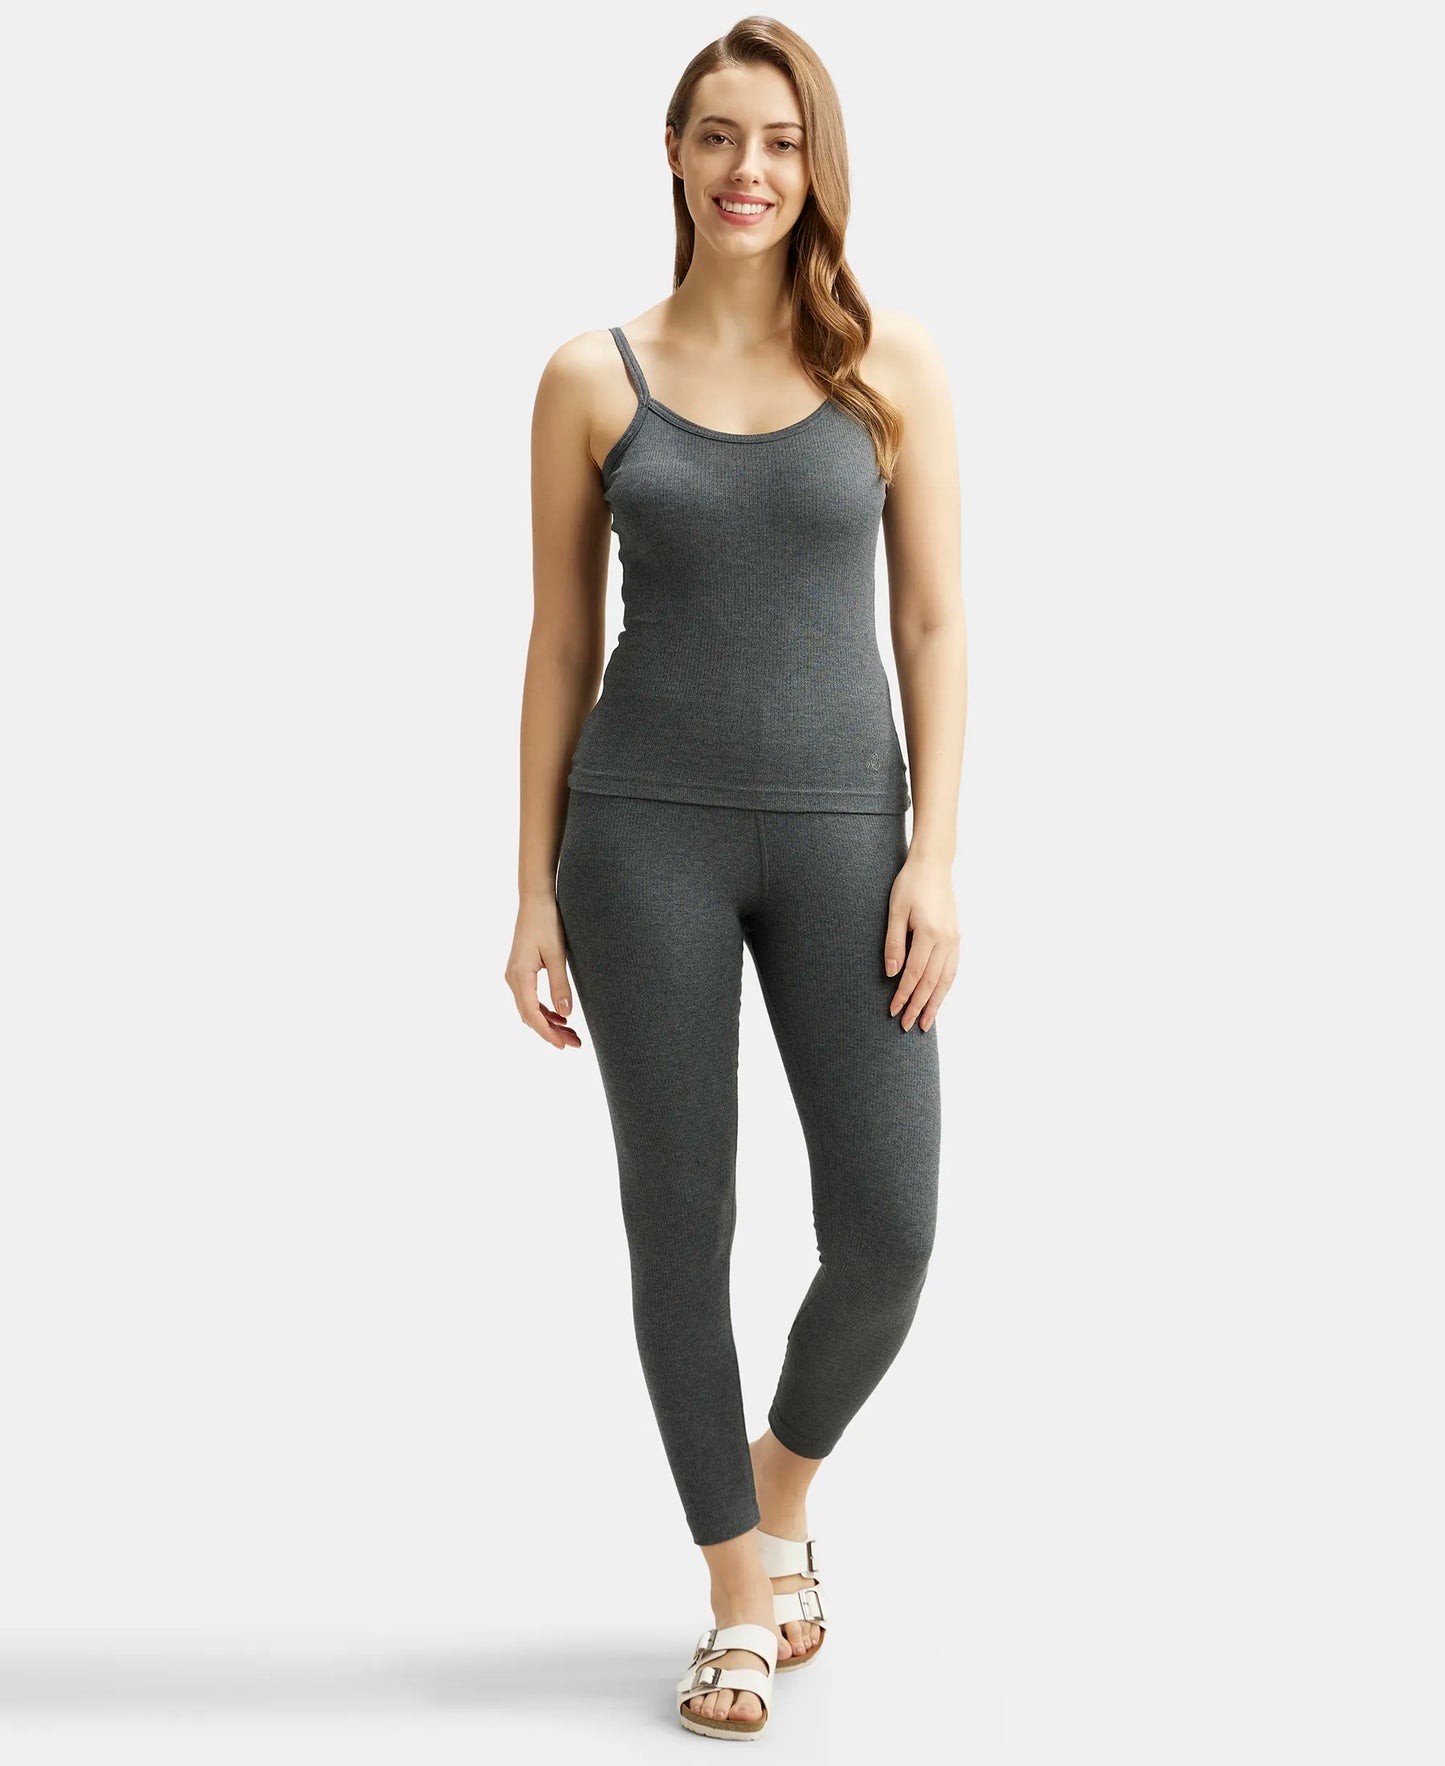 Super Combed Cotton Rich Thermal Camisole with StayWarm Technology - Charcoal Melange-4